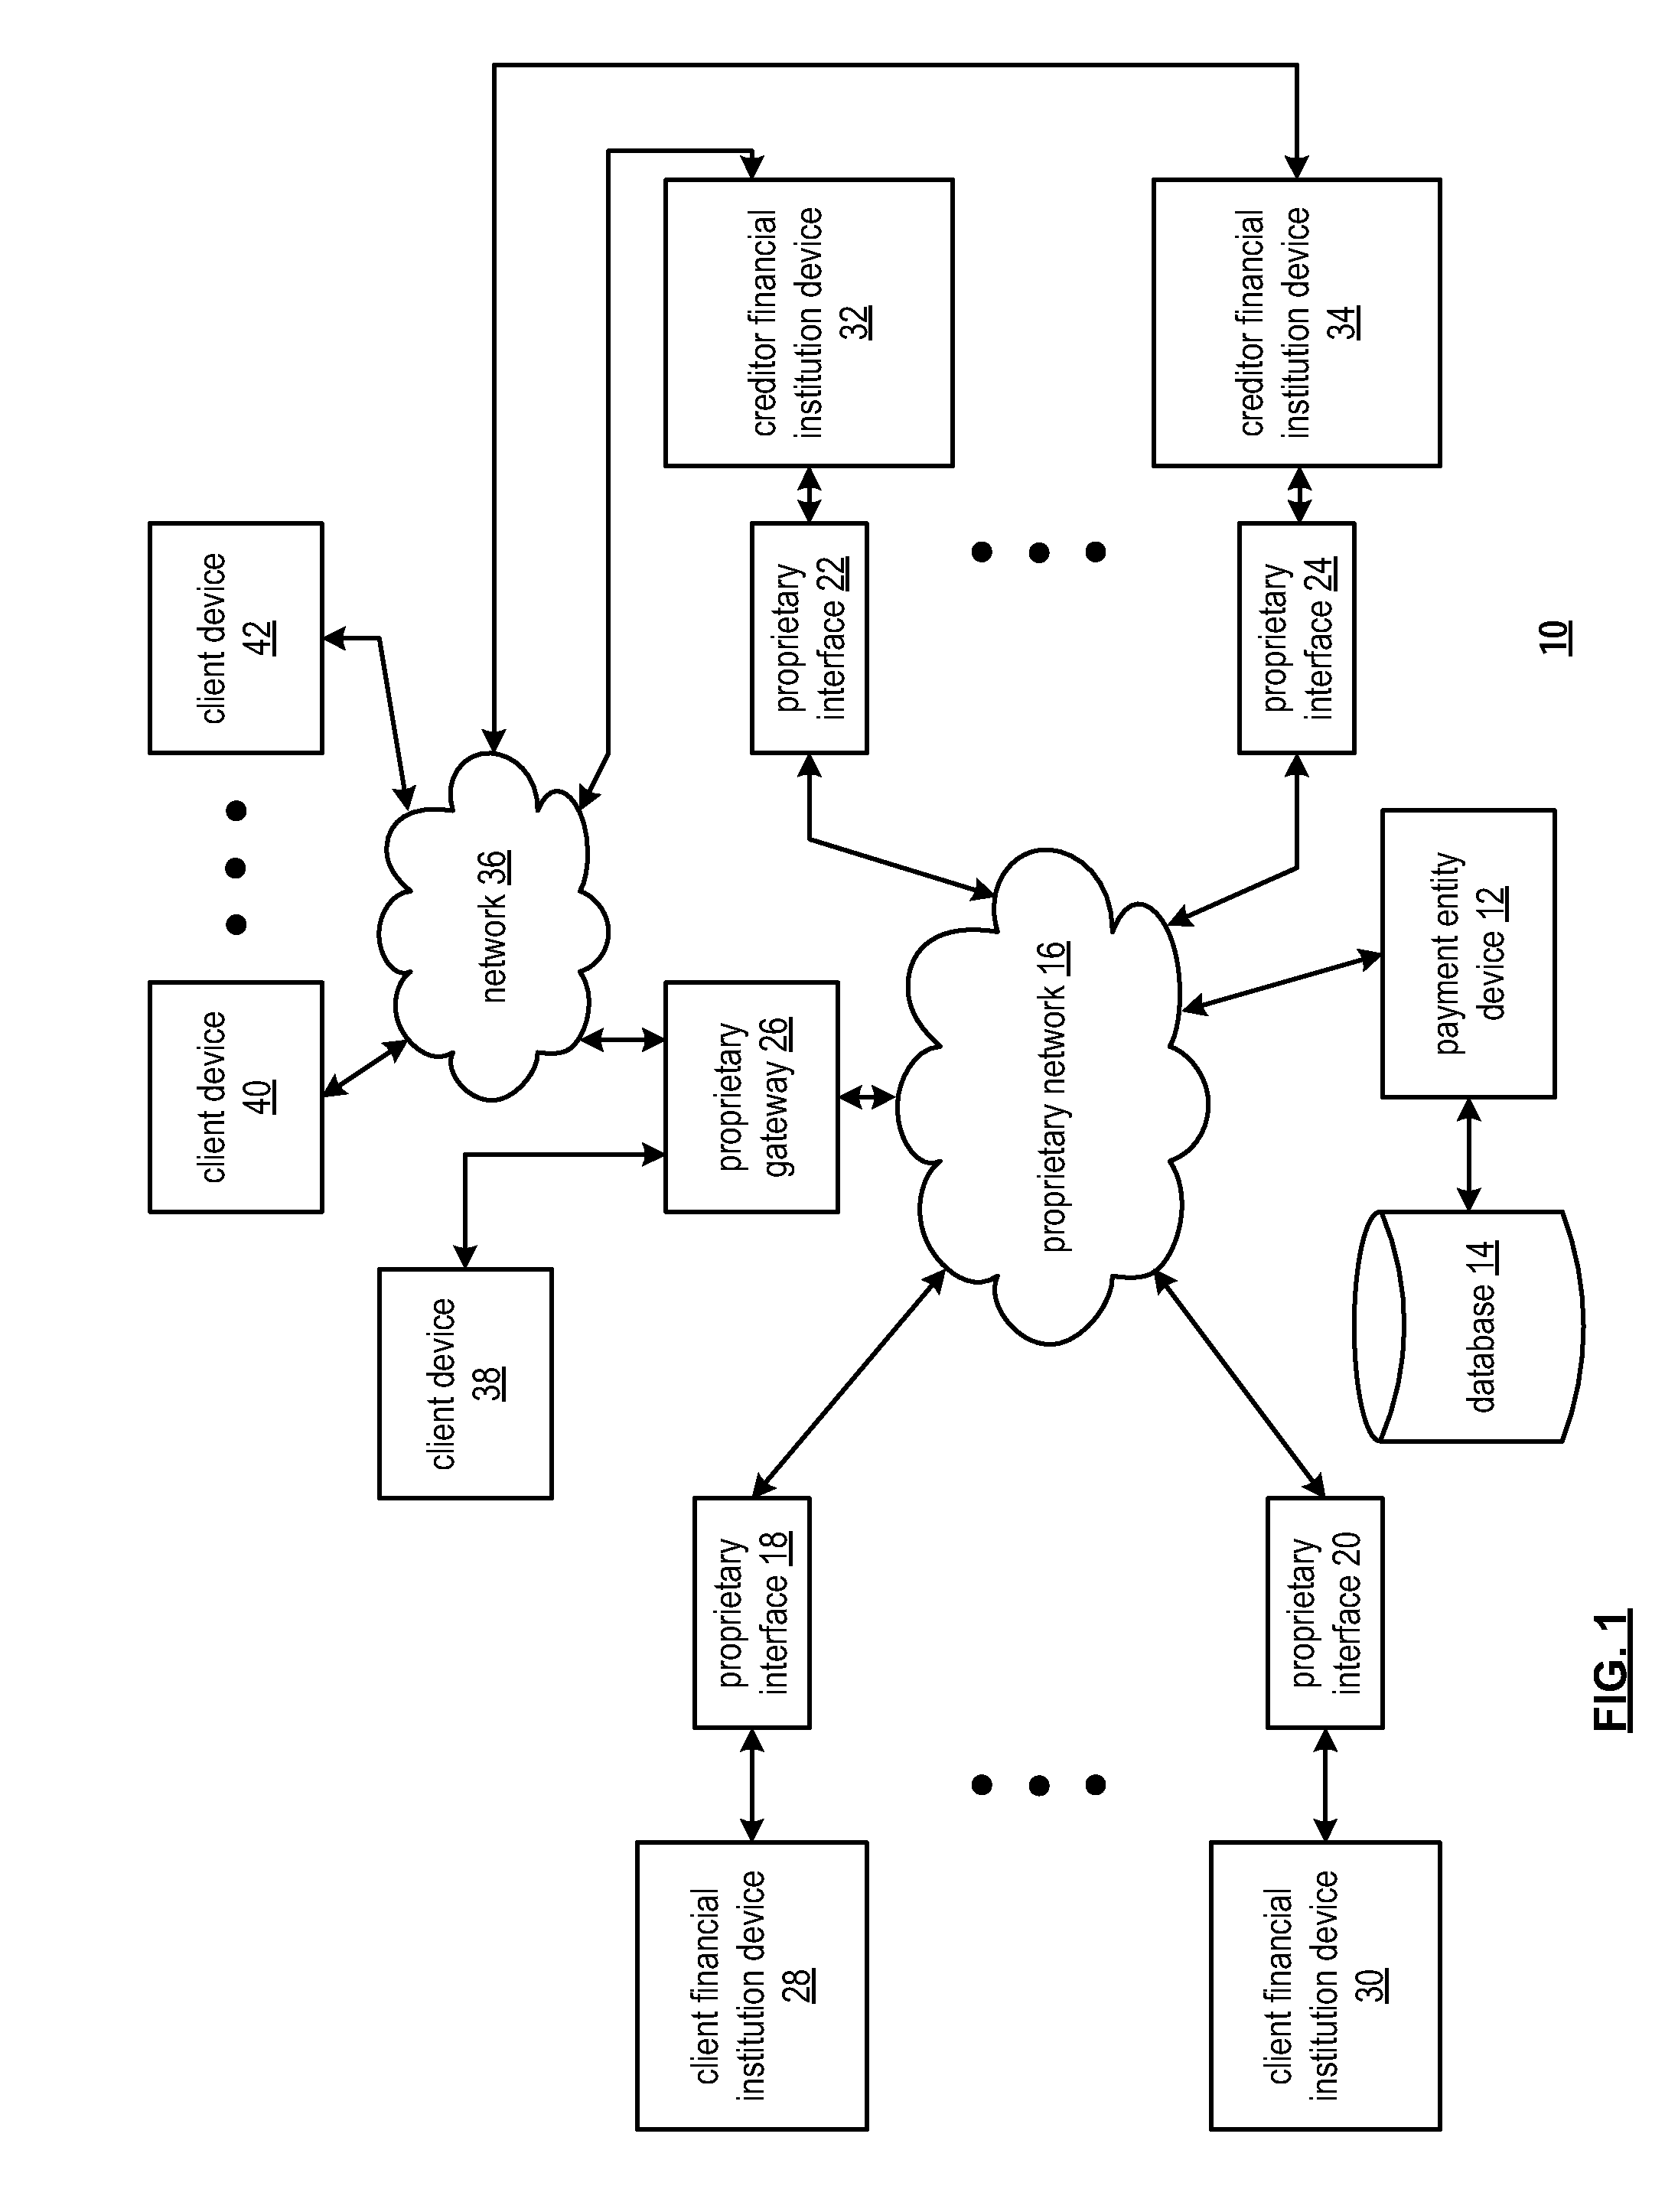 Payment entity device reconciliation for multiple payment methods